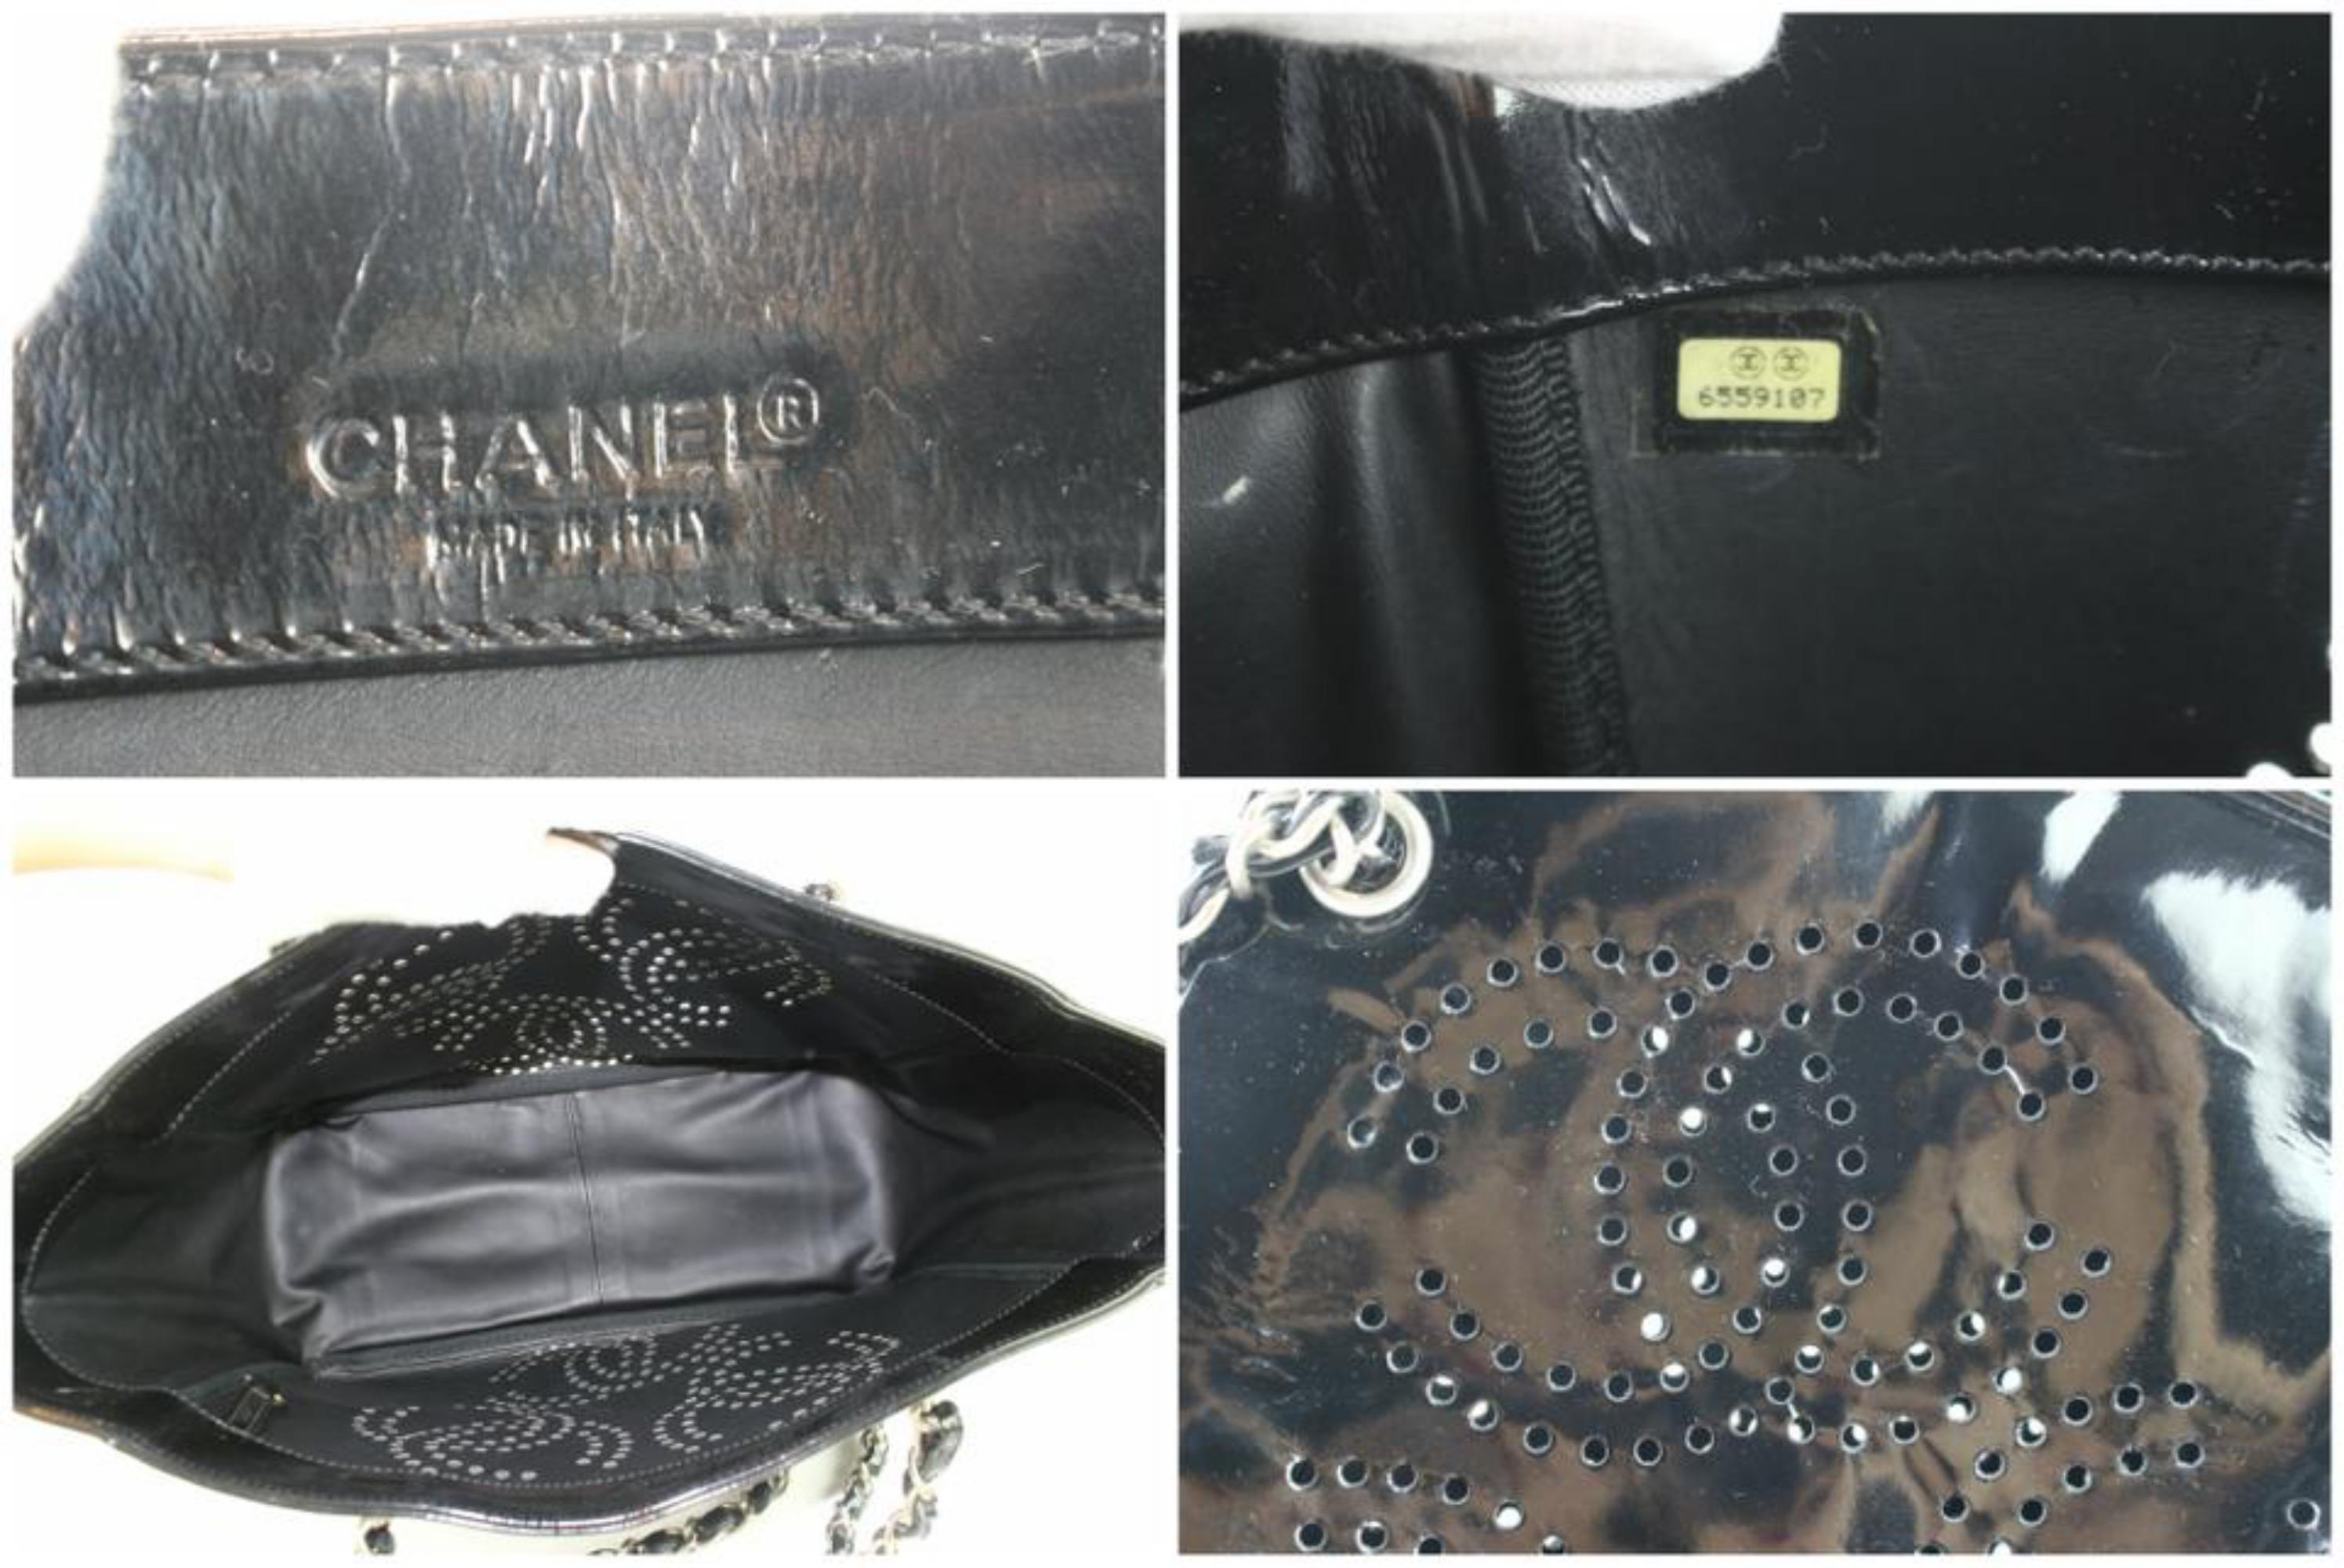 Chanel Triple Cc Logo Chain 227857 Black Patent Leather Tote In Good Condition For Sale In Forest Hills, NY